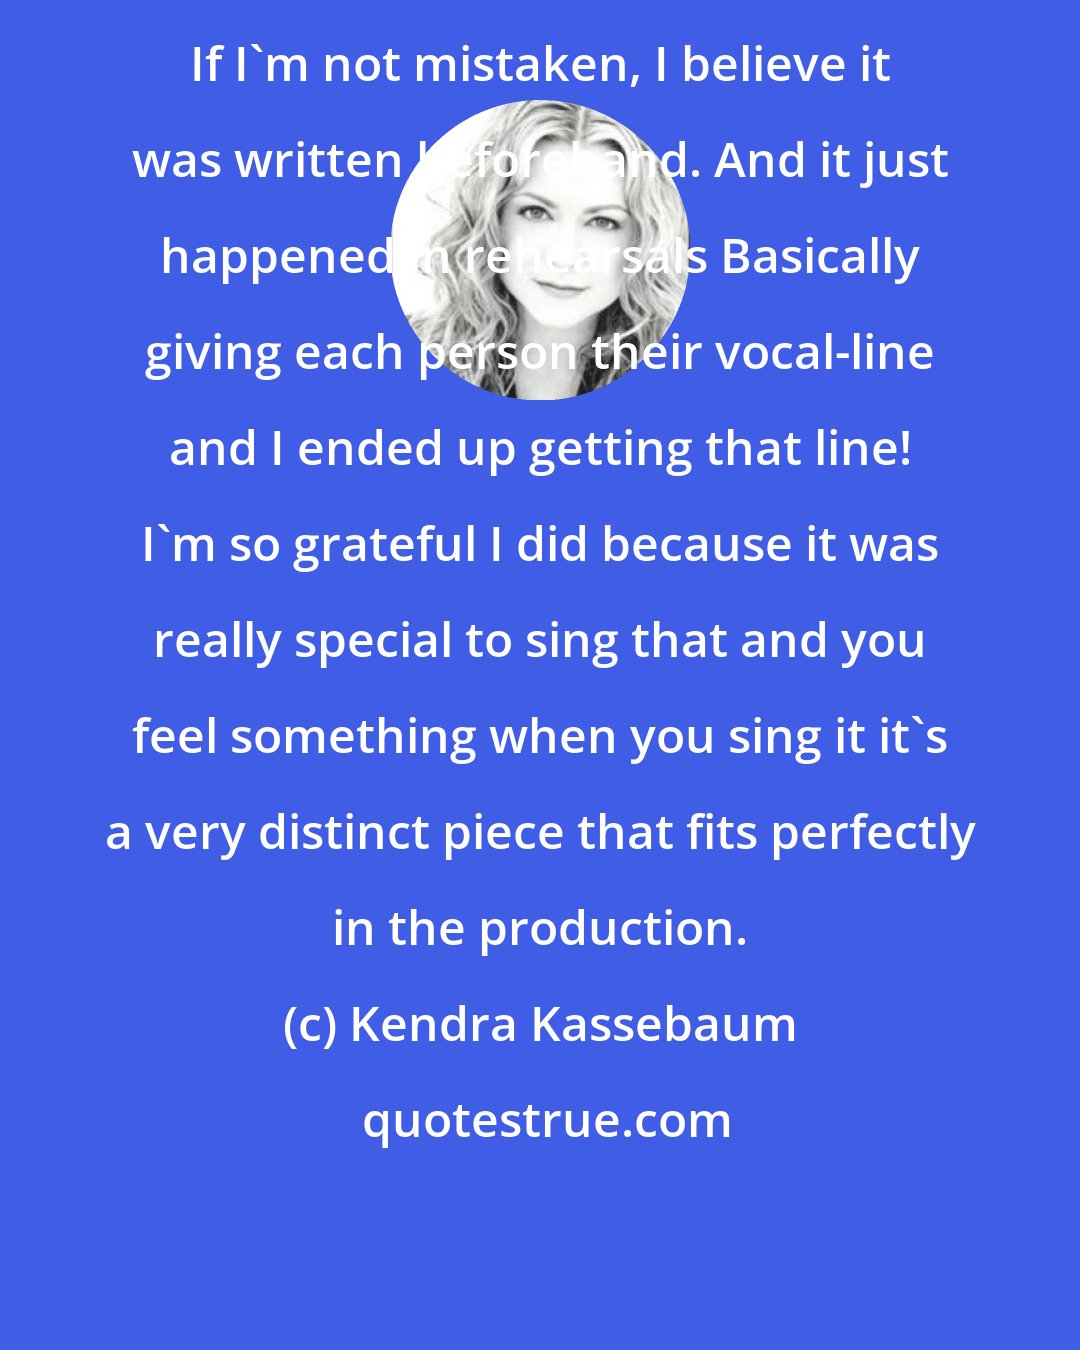 Kendra Kassebaum: If I'm not mistaken, I believe it was written beforehand. And it just happened in rehearsals Basically giving each person their vocal-line and I ended up getting that line! I'm so grateful I did because it was really special to sing that and you feel something when you sing it it's a very distinct piece that fits perfectly in the production.